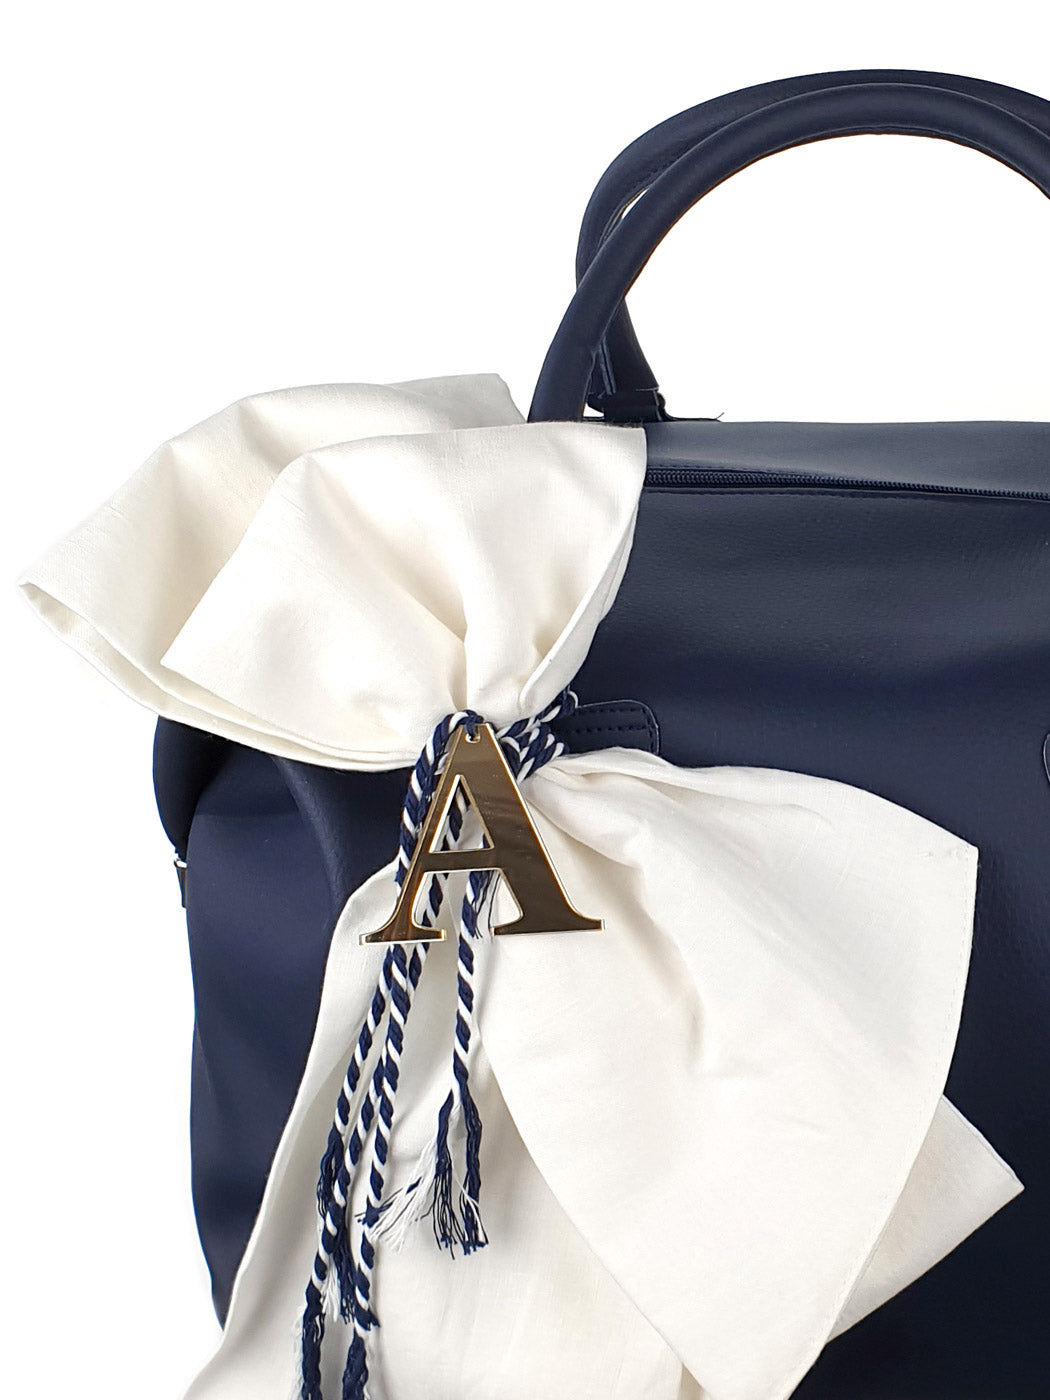 Baptism Blue Bag with leather-looks like